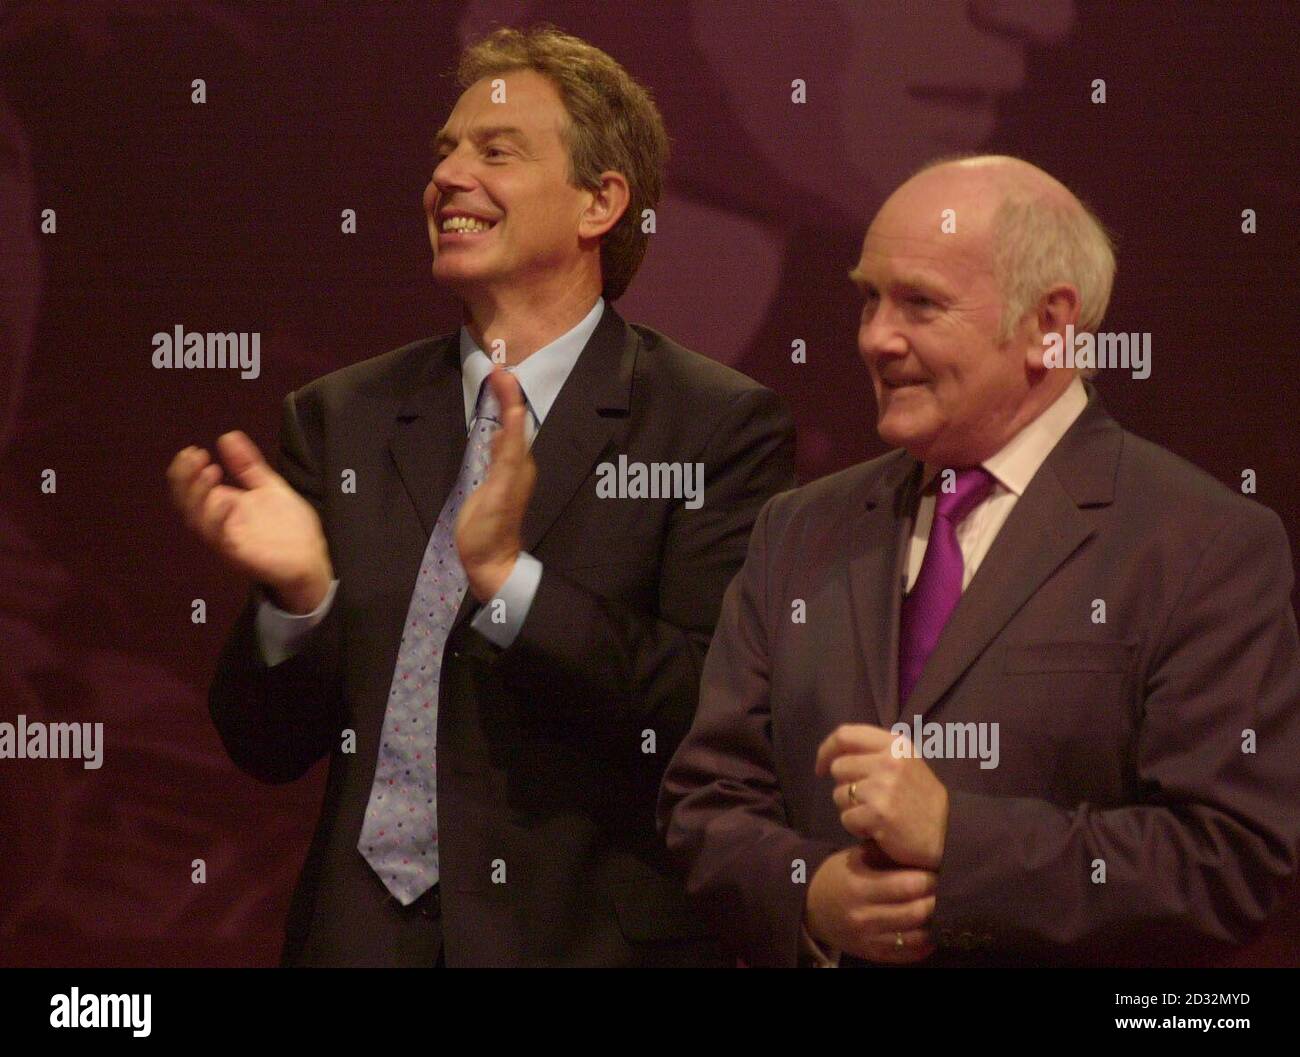 Prime Minister Tony Blair and the Secretary of State for Northern Ireland John Reid applaud the audience at the end of the Labour Party Conference in Blackpool. Stock Photo